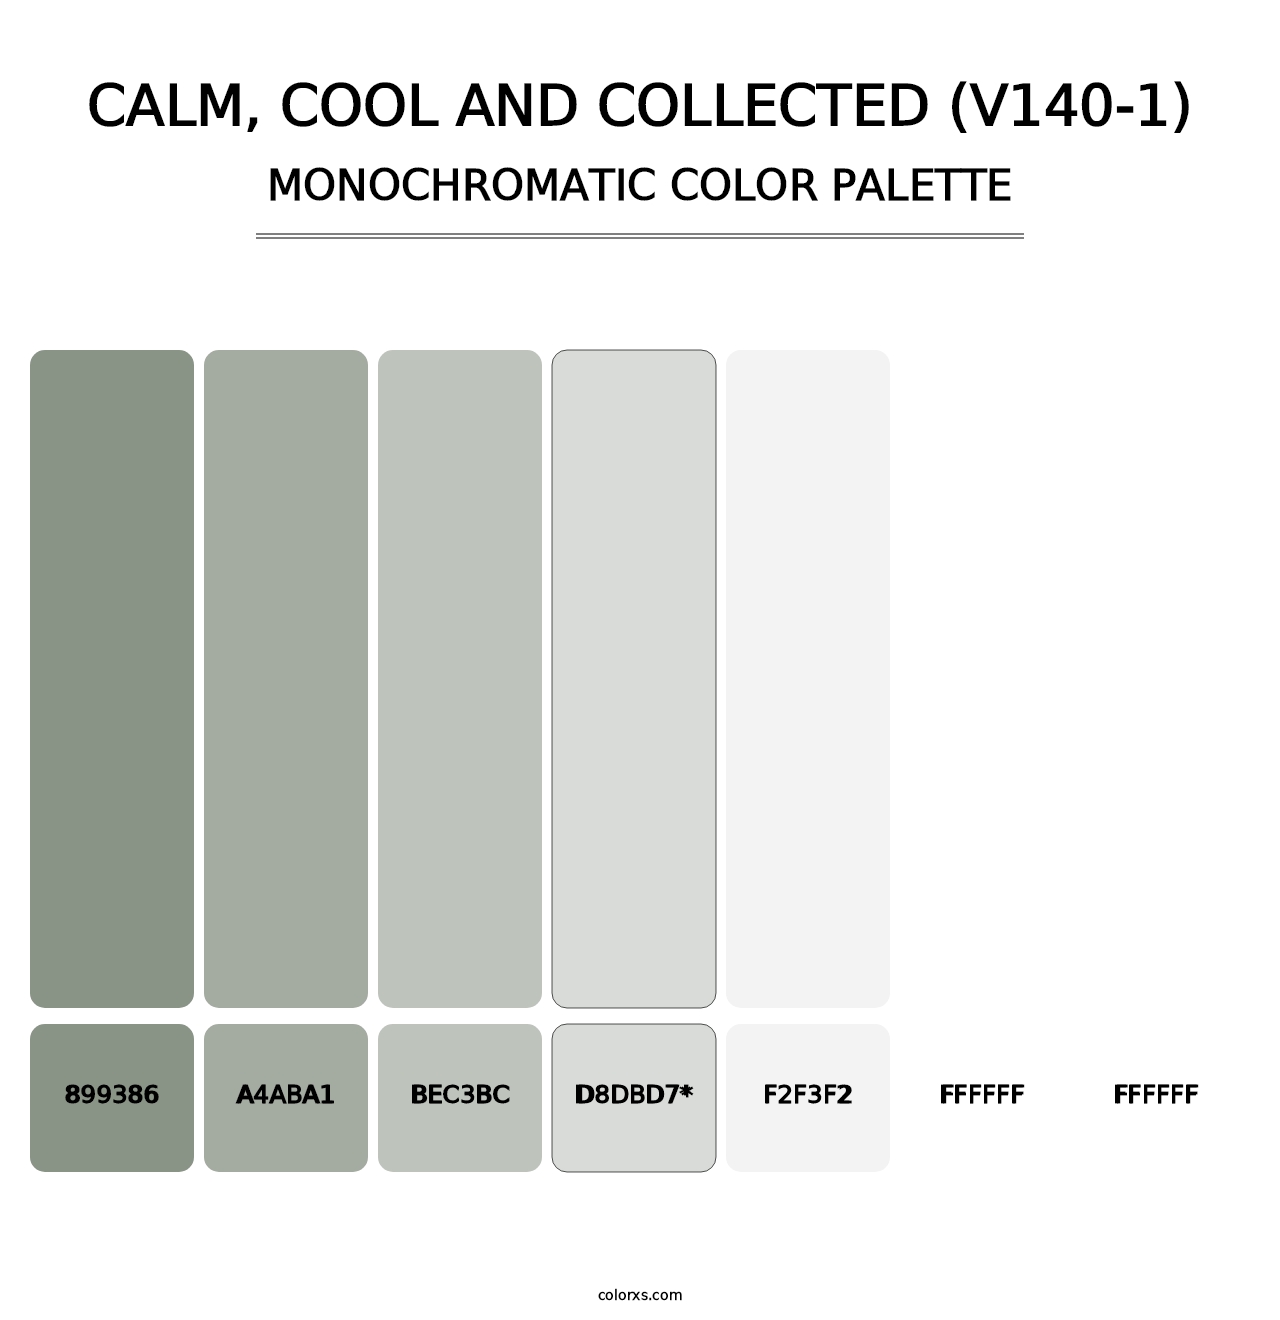 Calm, Cool and Collected (V140-1) - Monochromatic Color Palette